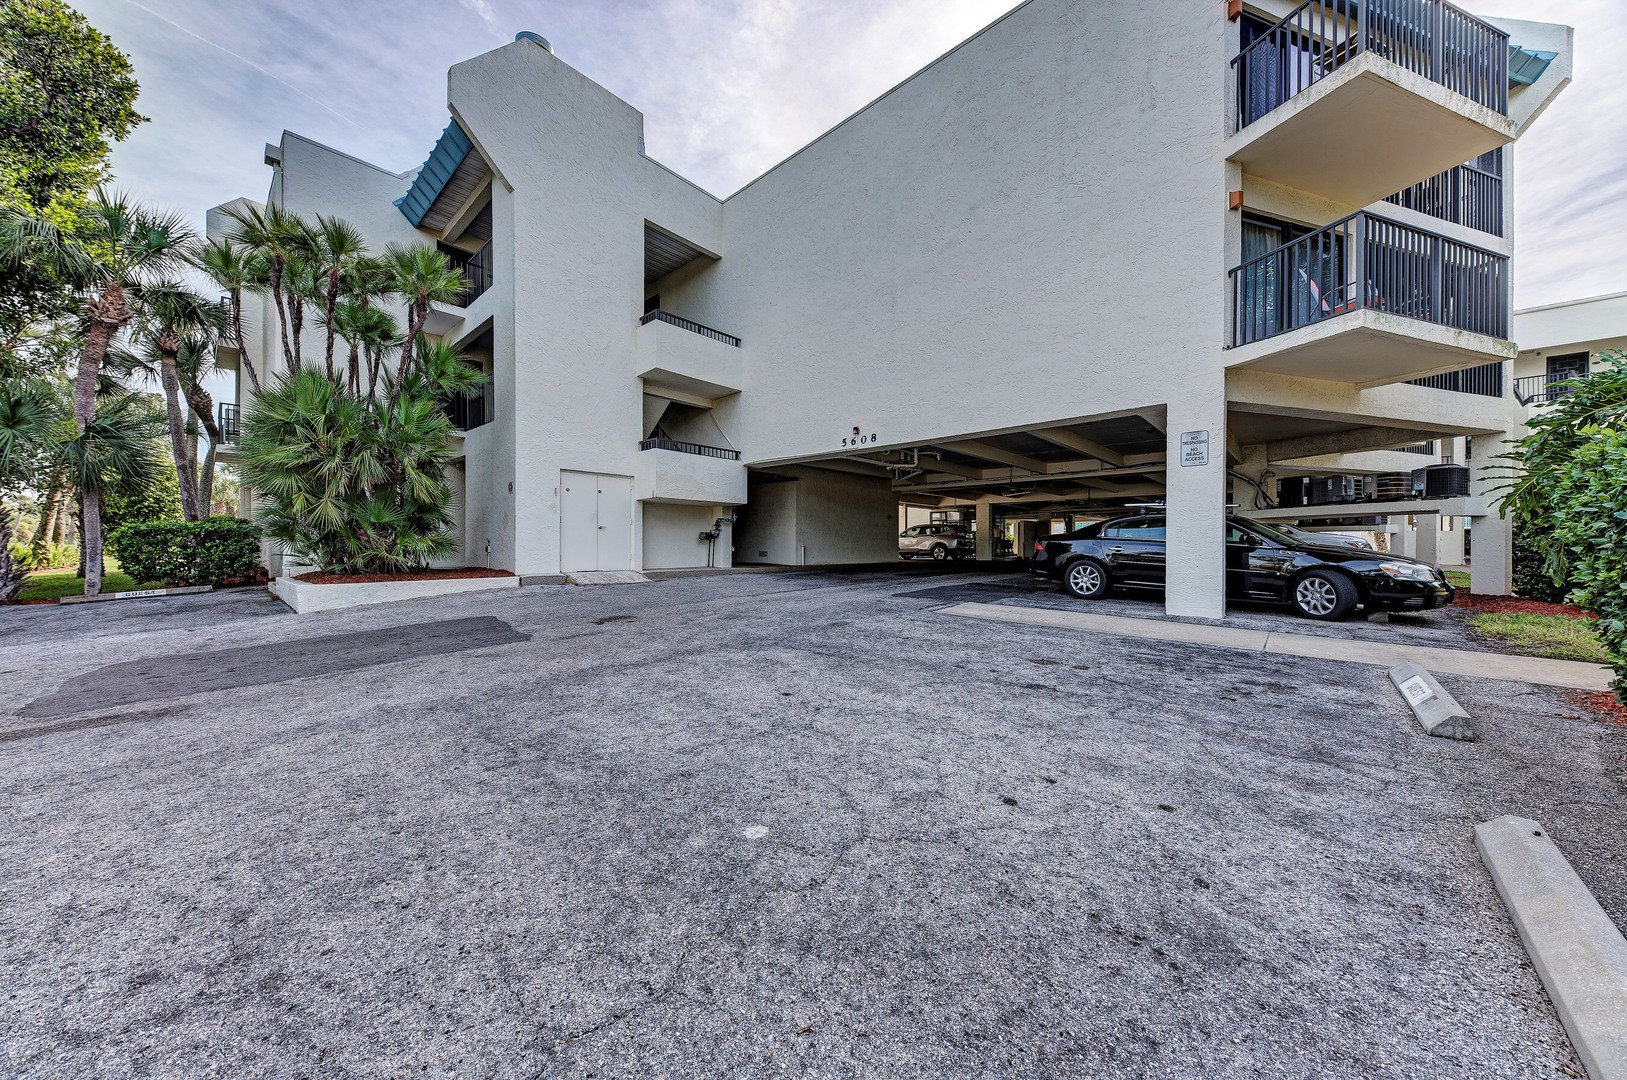 Sun Plaza West condo parking area view from street